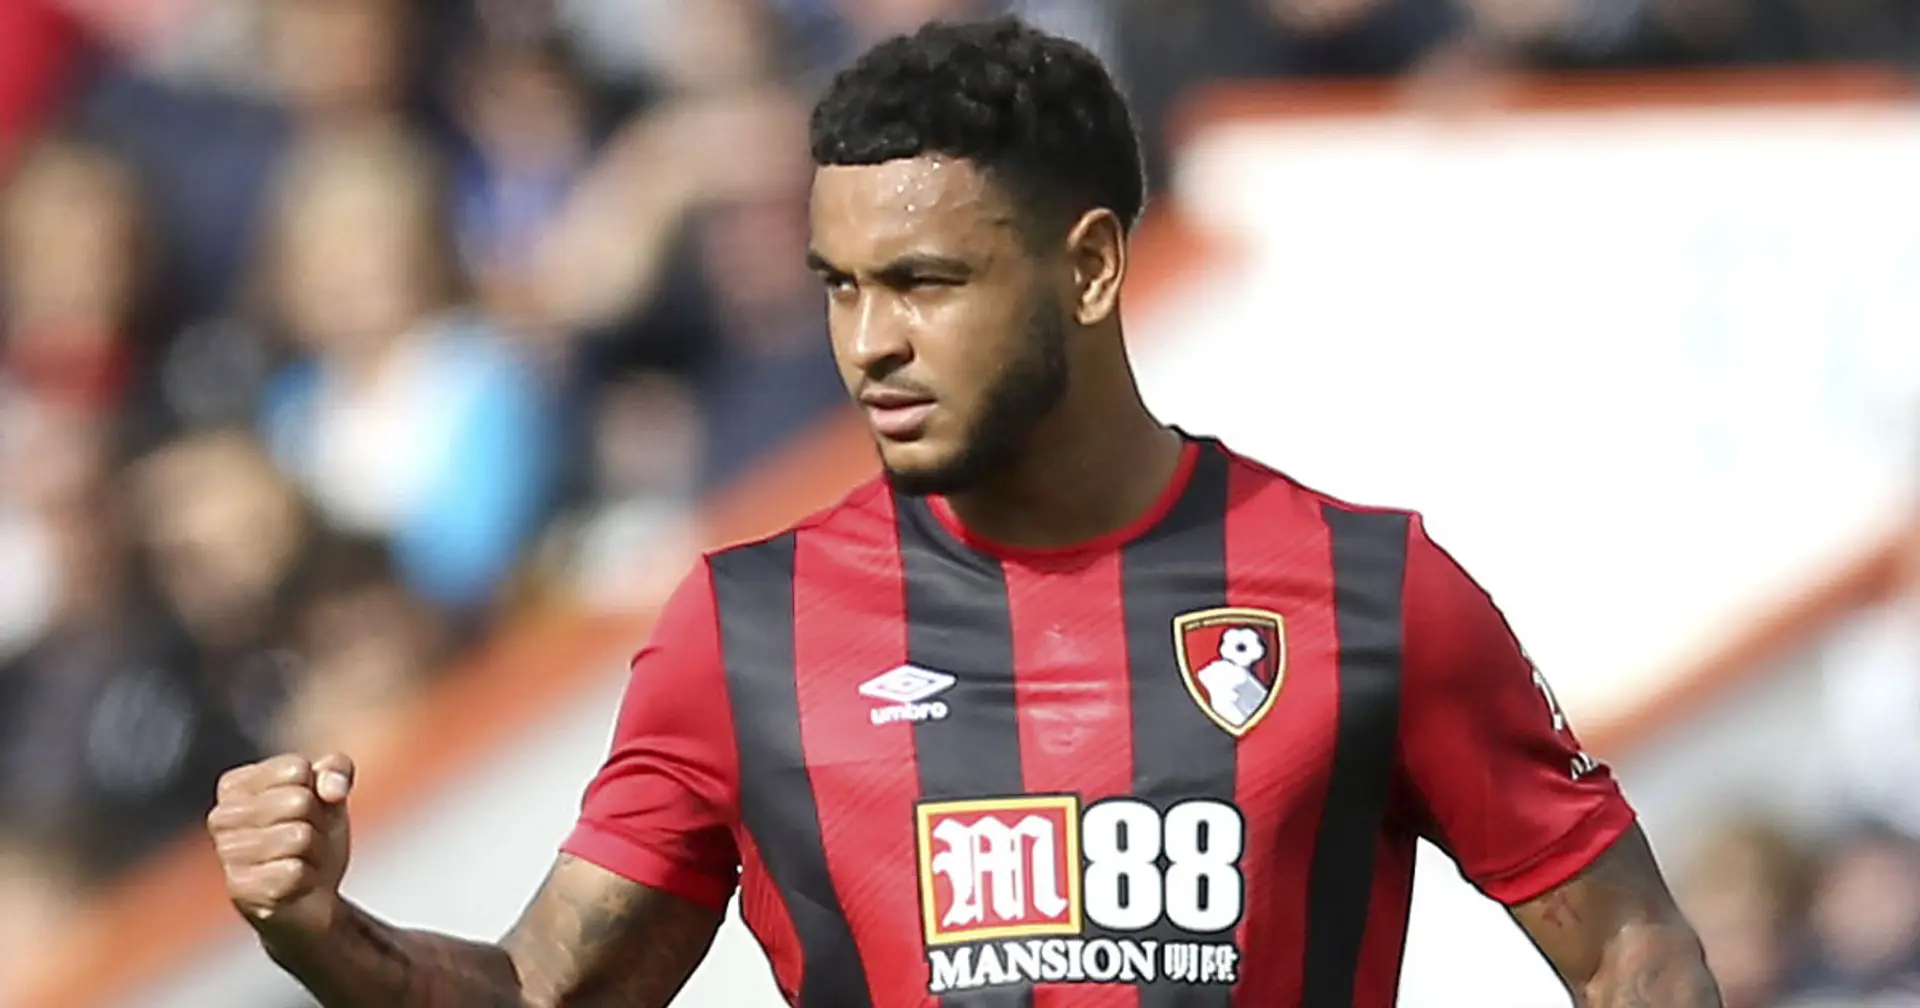 Four clubs from PL top 6 reportedly interested in Bournemouth striker who looks like potential Plan B if Werner to Liverpool doesn't materialise